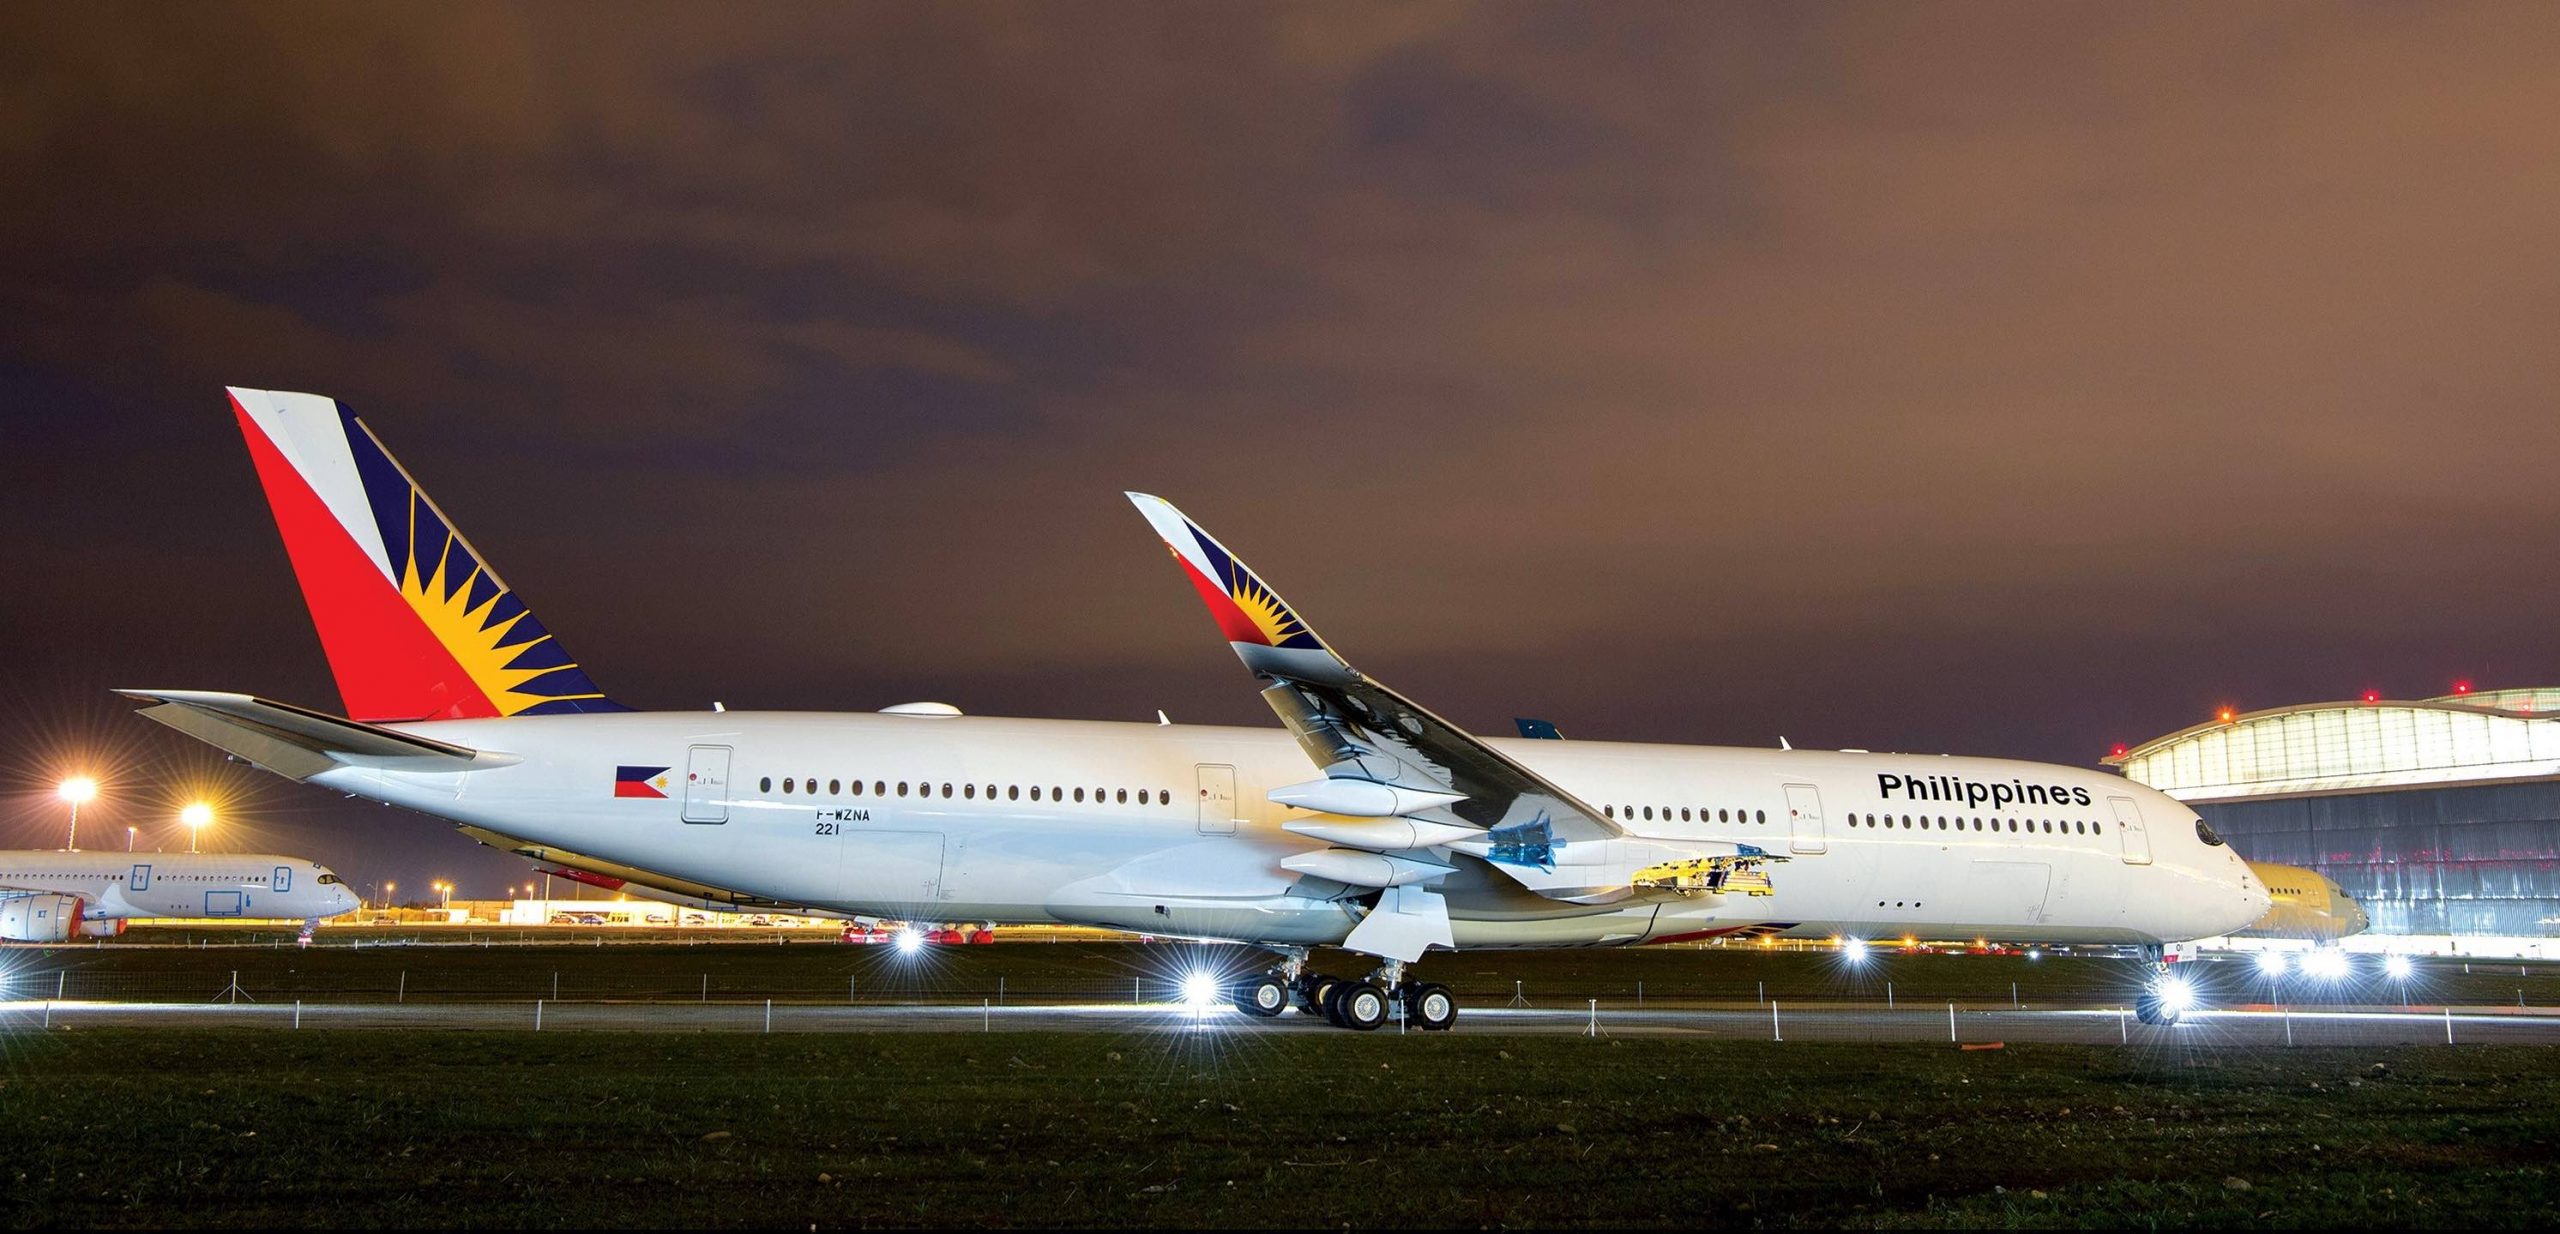 Airline company Philippine Airlines emerged from bankruptcy